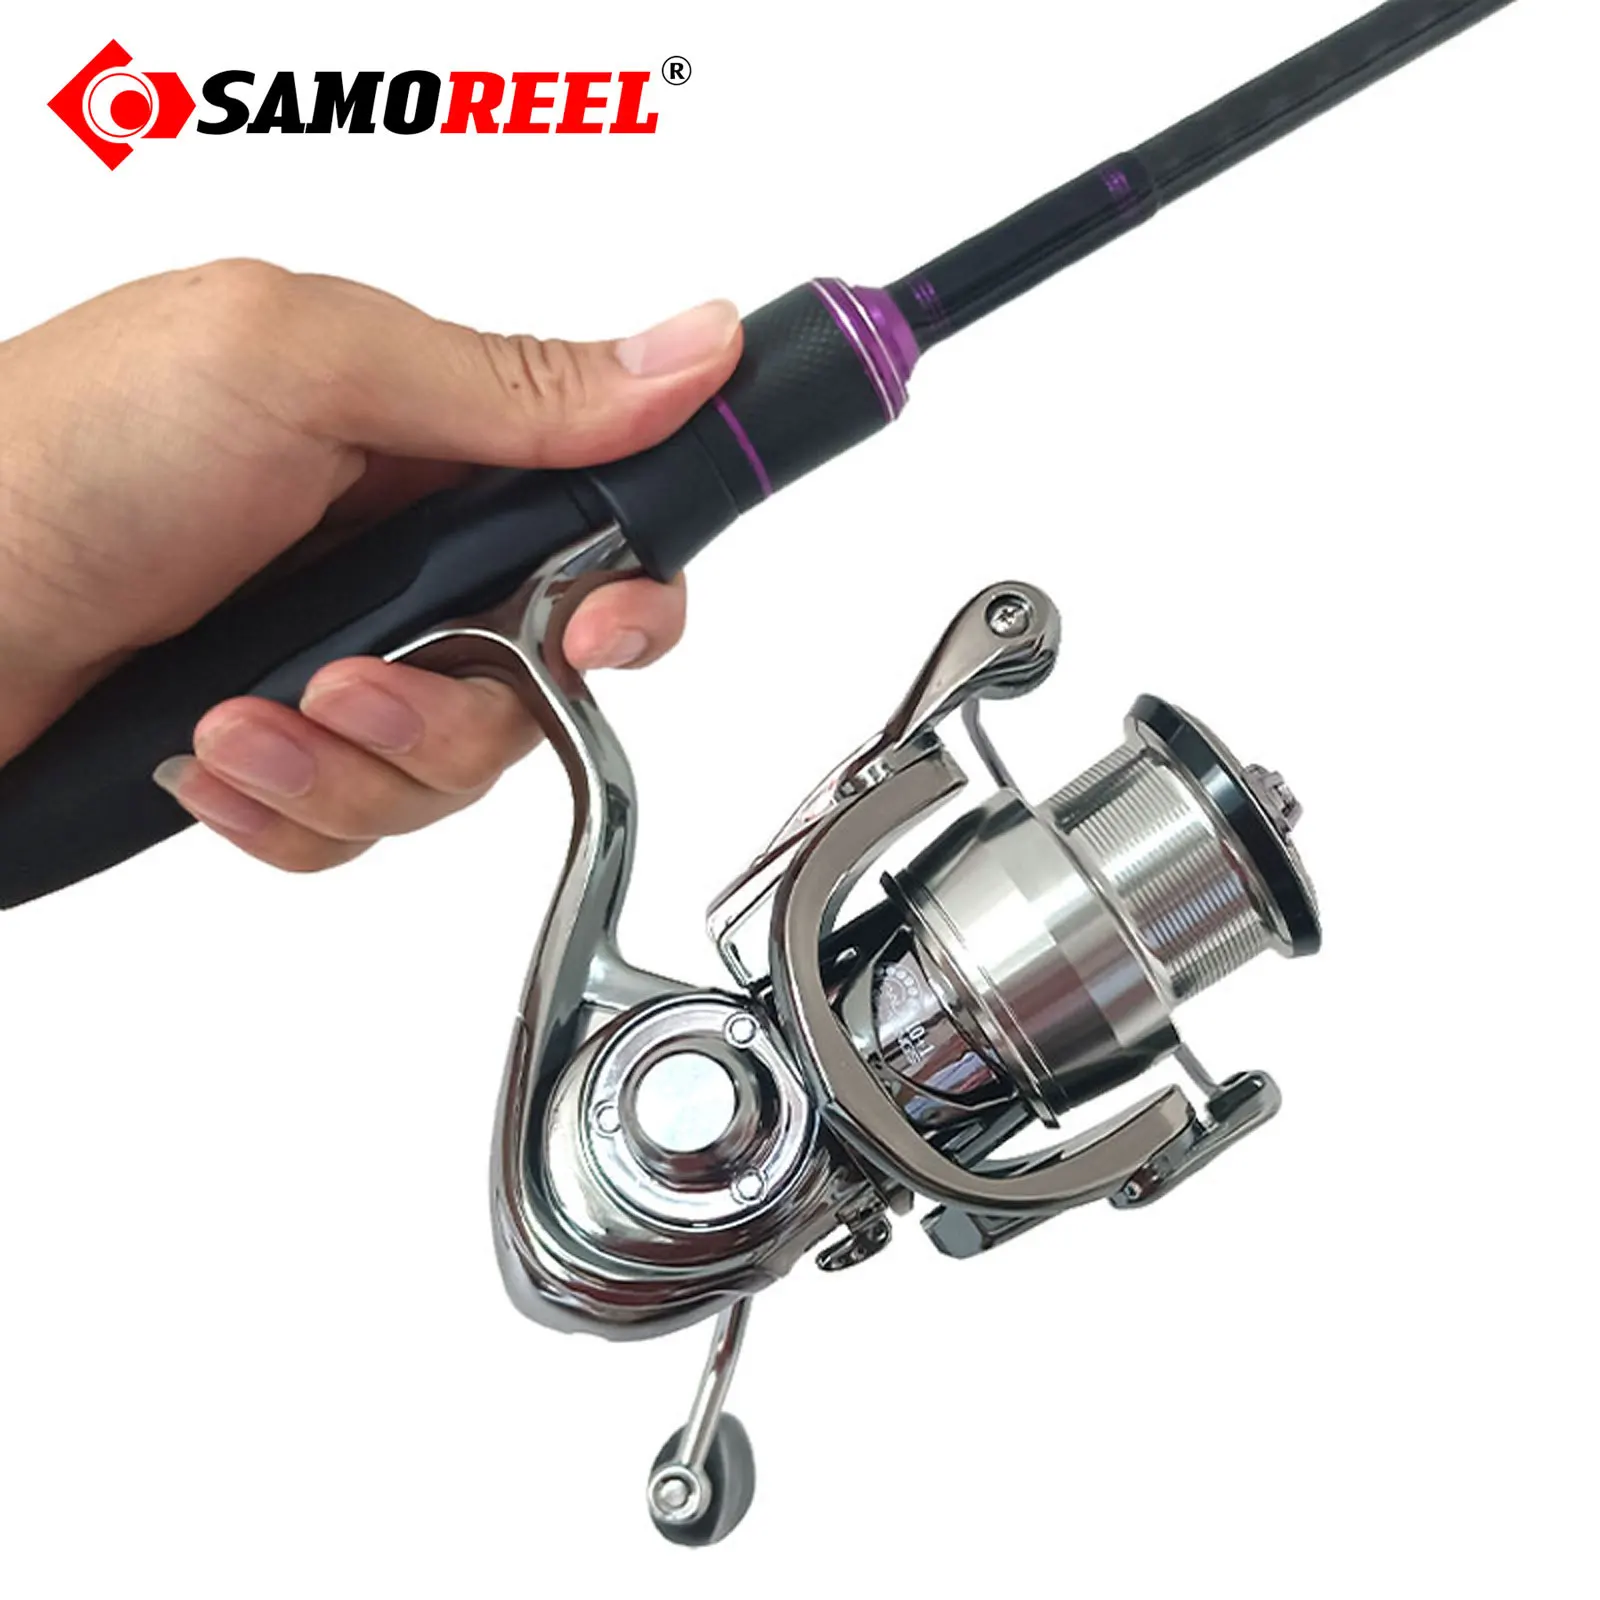 

DAIWA EXIST LT Same High Quality Spinning Fishing Reel 10+1BB 6.3:1 10-16kg Drag Saltwater Freshwater Best Reels Pesca For Trout